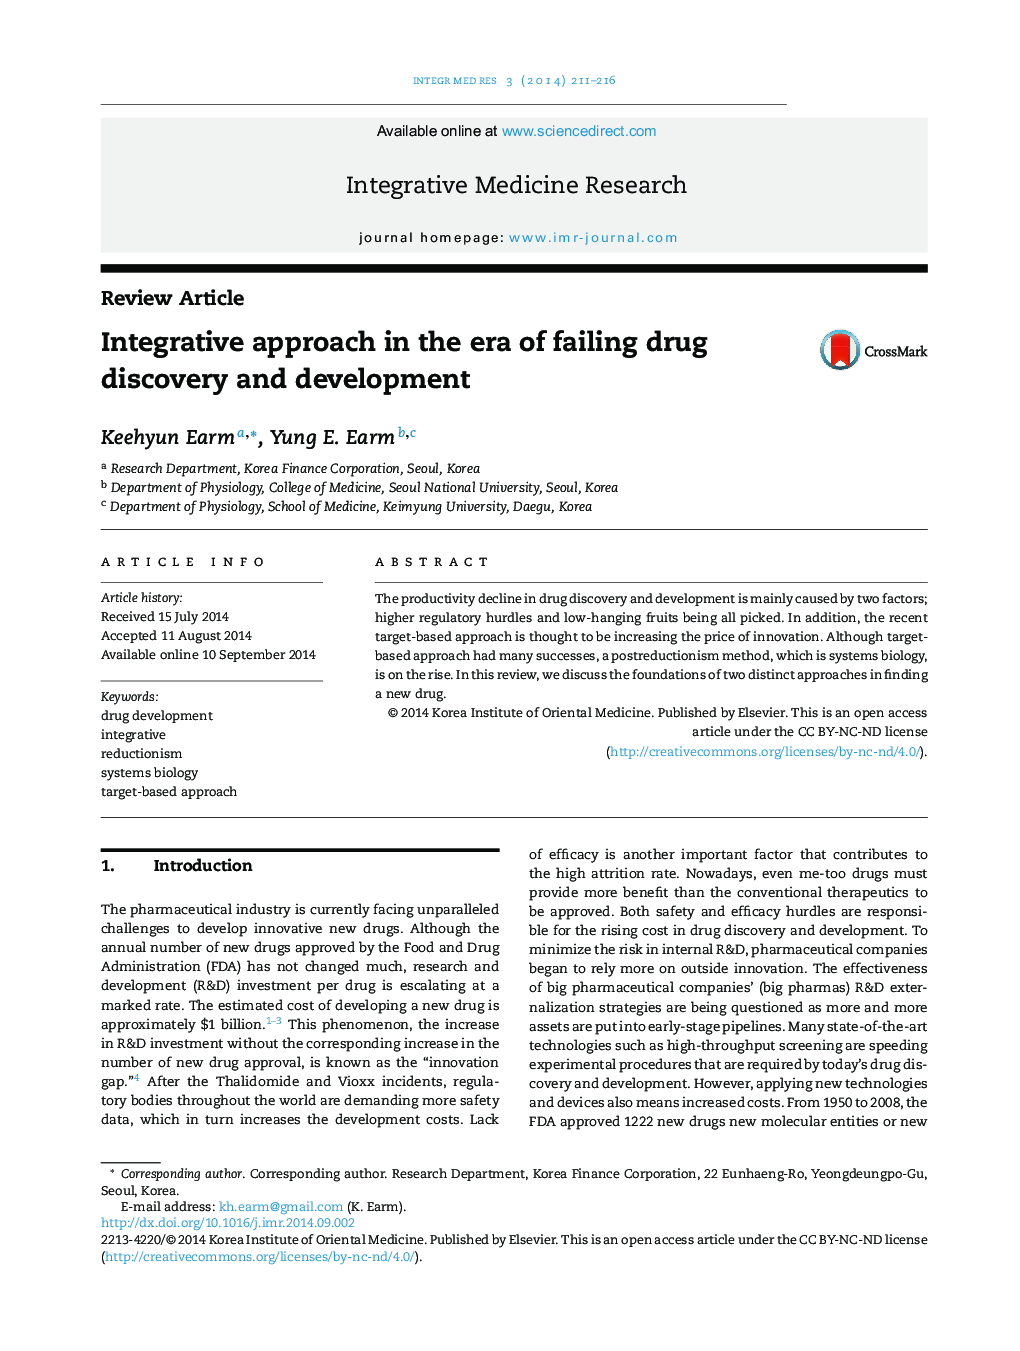 Integrative approach in the era of failing drug discovery and development